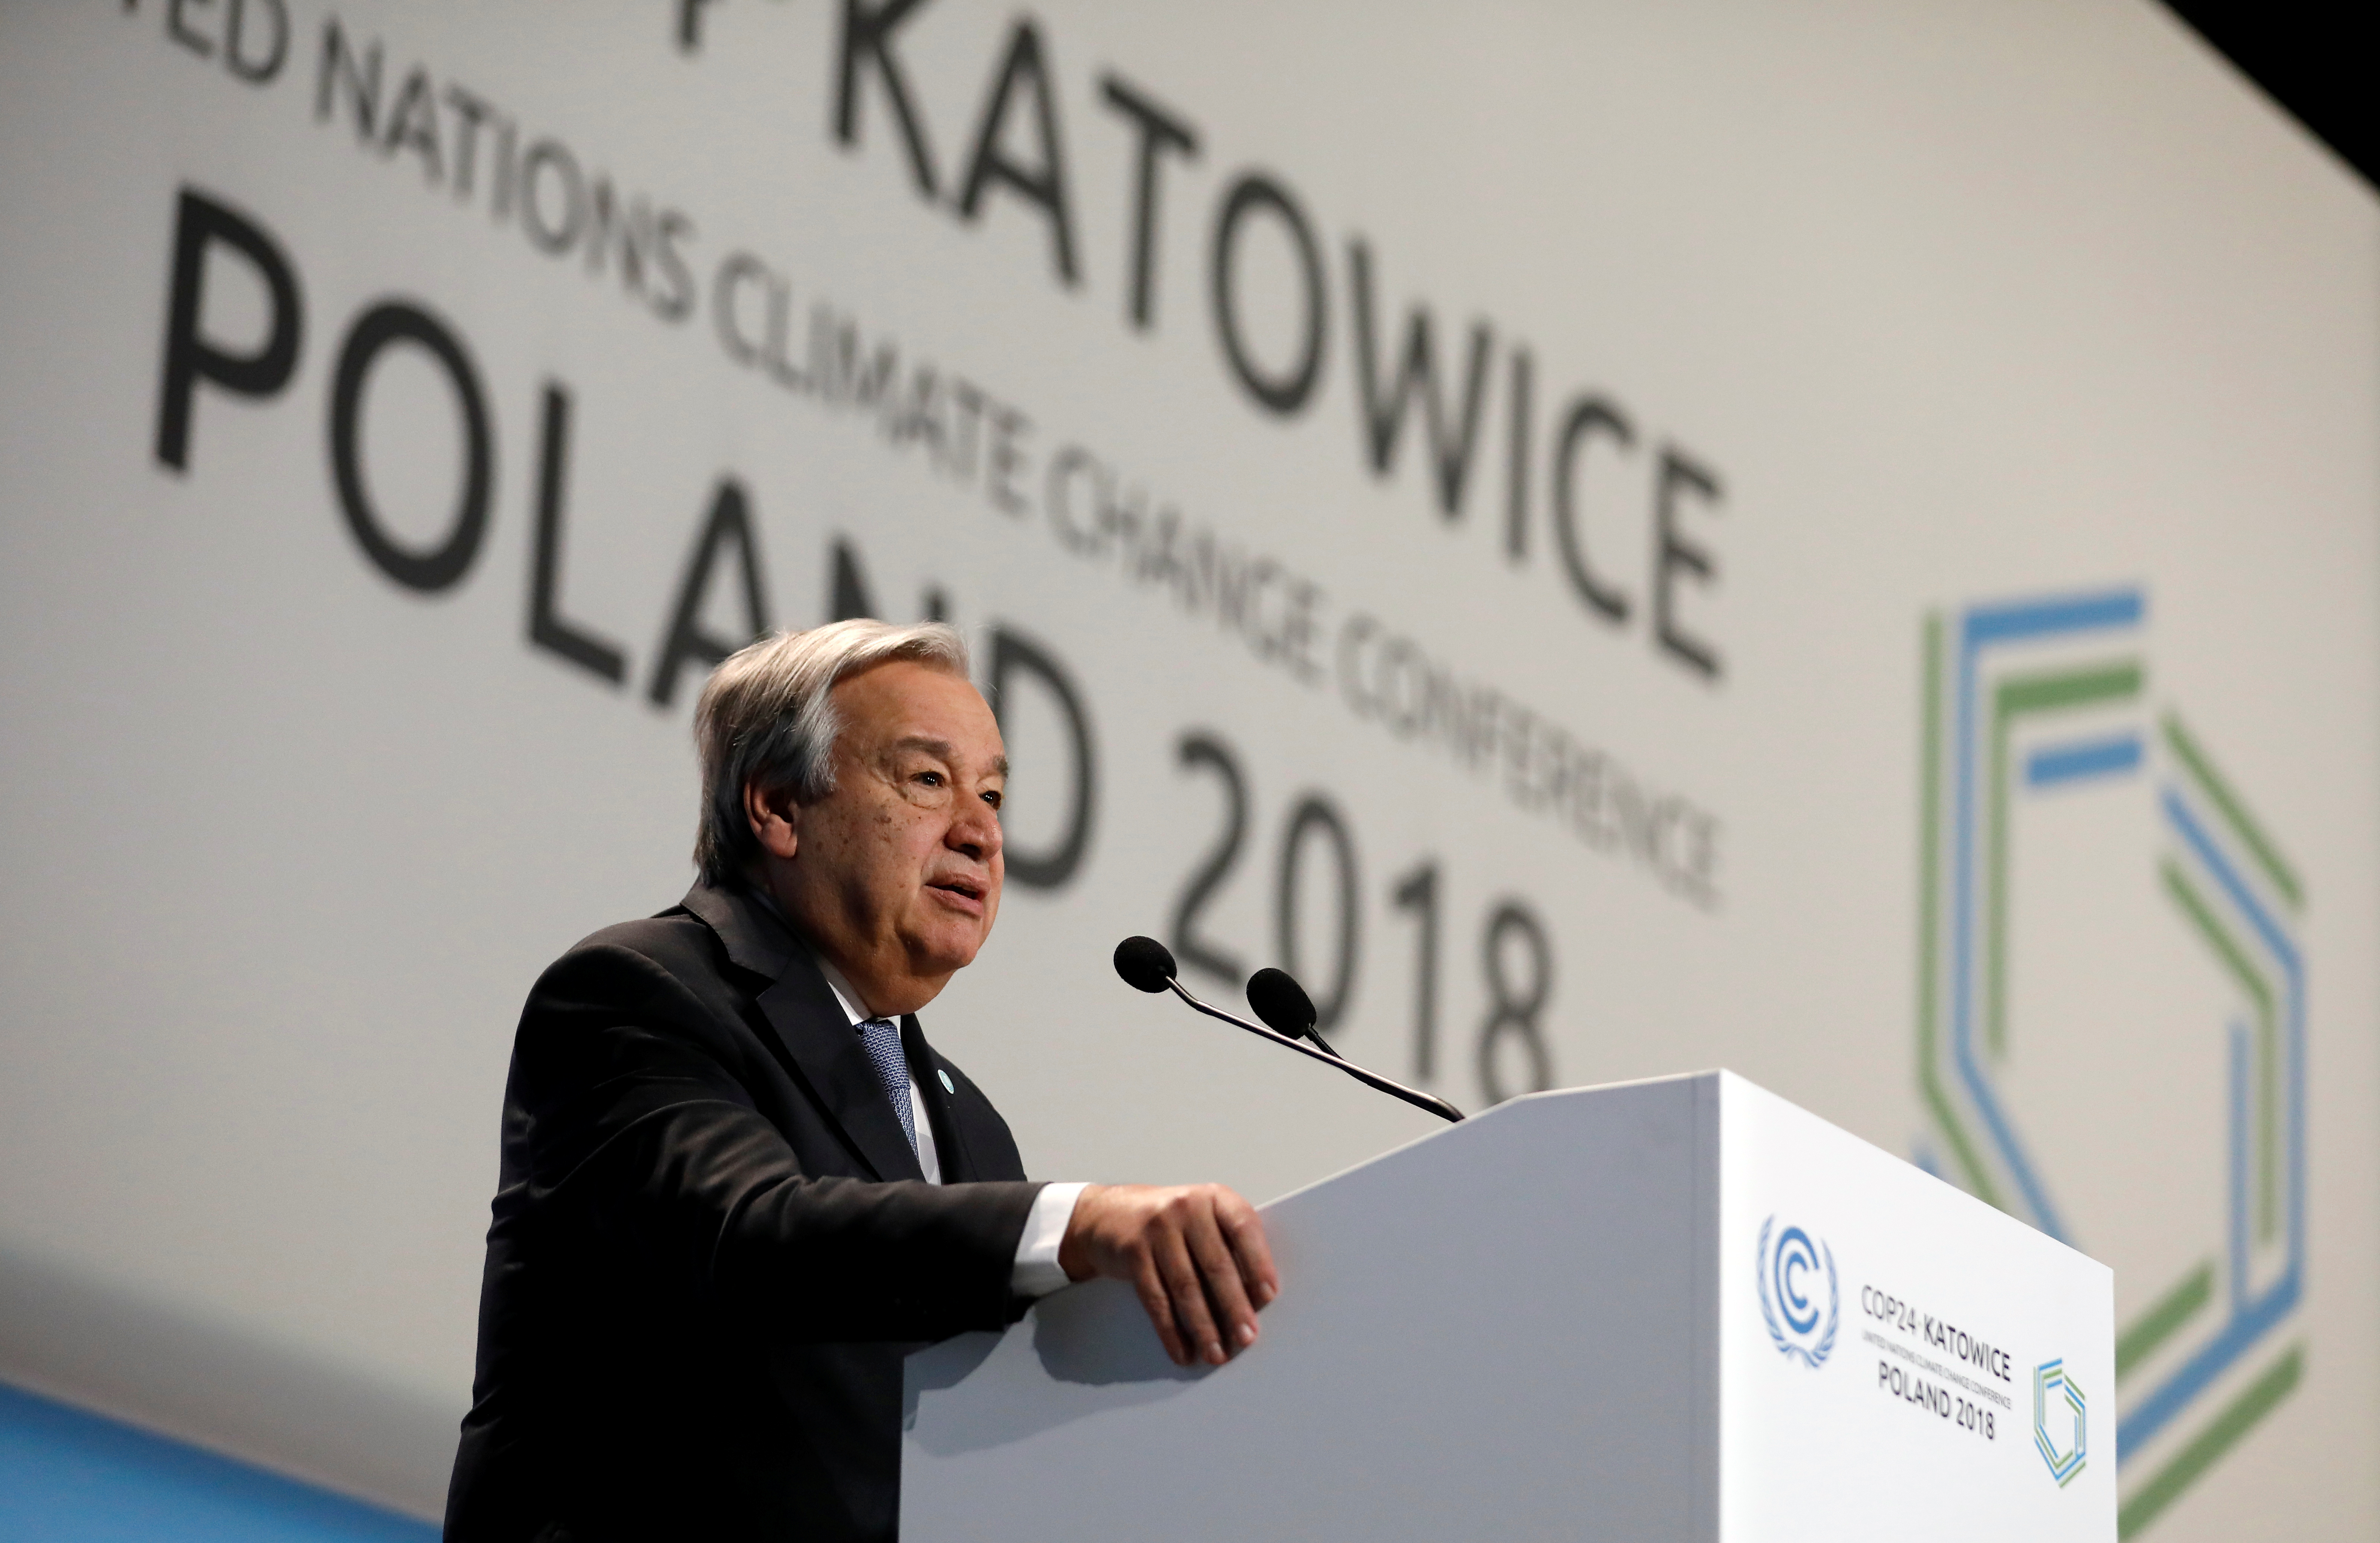 COP24 UN Climate Change Conference 2018 in Katowice